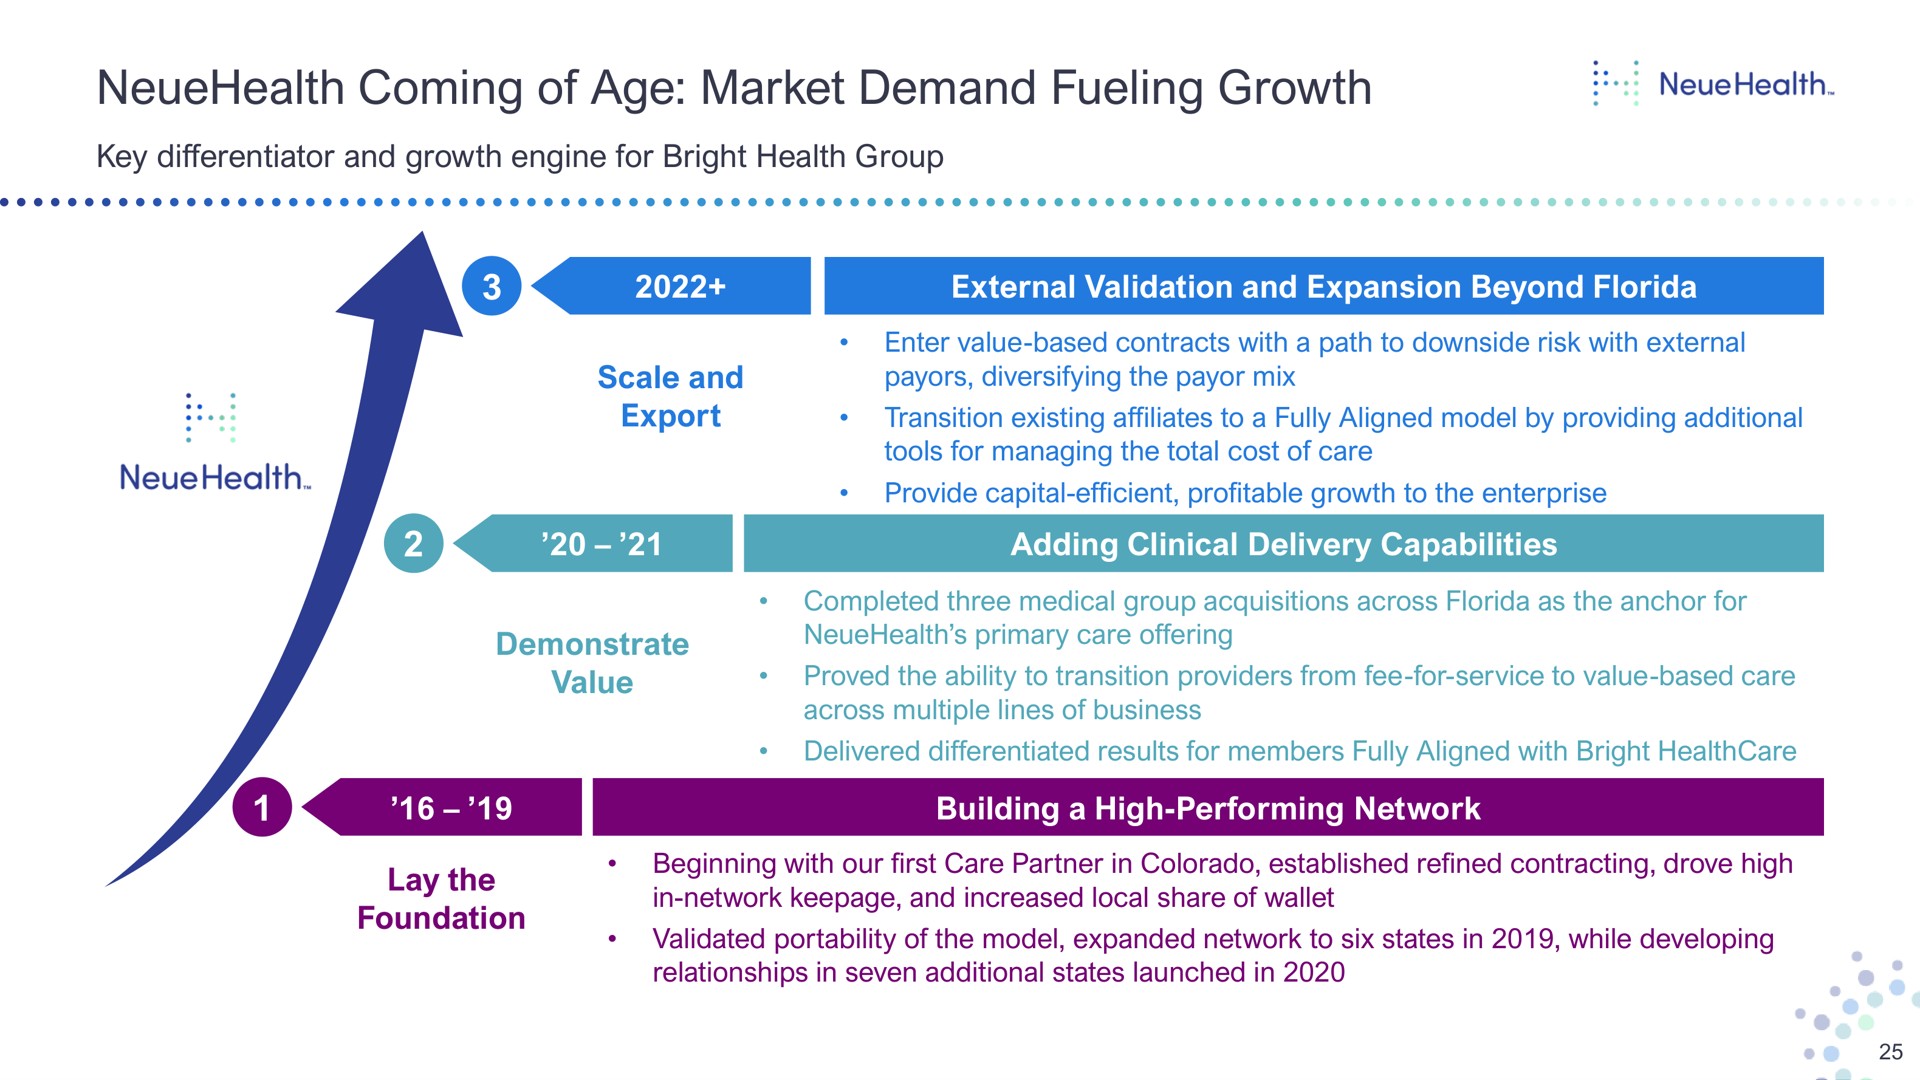 coming of age market demand fueling growth key differentiator and engine for bright health group external validation and expansion beyond scale and export enter value based contracts with a path to downside risk with external diversifying the payor mix transition existing affiliates to a fully aligned model by providing additional tools for managing the total cost care provide capital efficient profitable to the enterprise a adding clinical delivery capabilities demonstrate value primary care offering proved the ability to transition providers from fee for service to value based care delivered differentiated results for members fully aligned with bright building a high performing network lay the foundation beginning with our first care partner in colorado established refined contracting drove high in network and increased local share wallet validated portability the model expanded network to six states in while developing relationships in seven additional states launched in | Bright Health Group